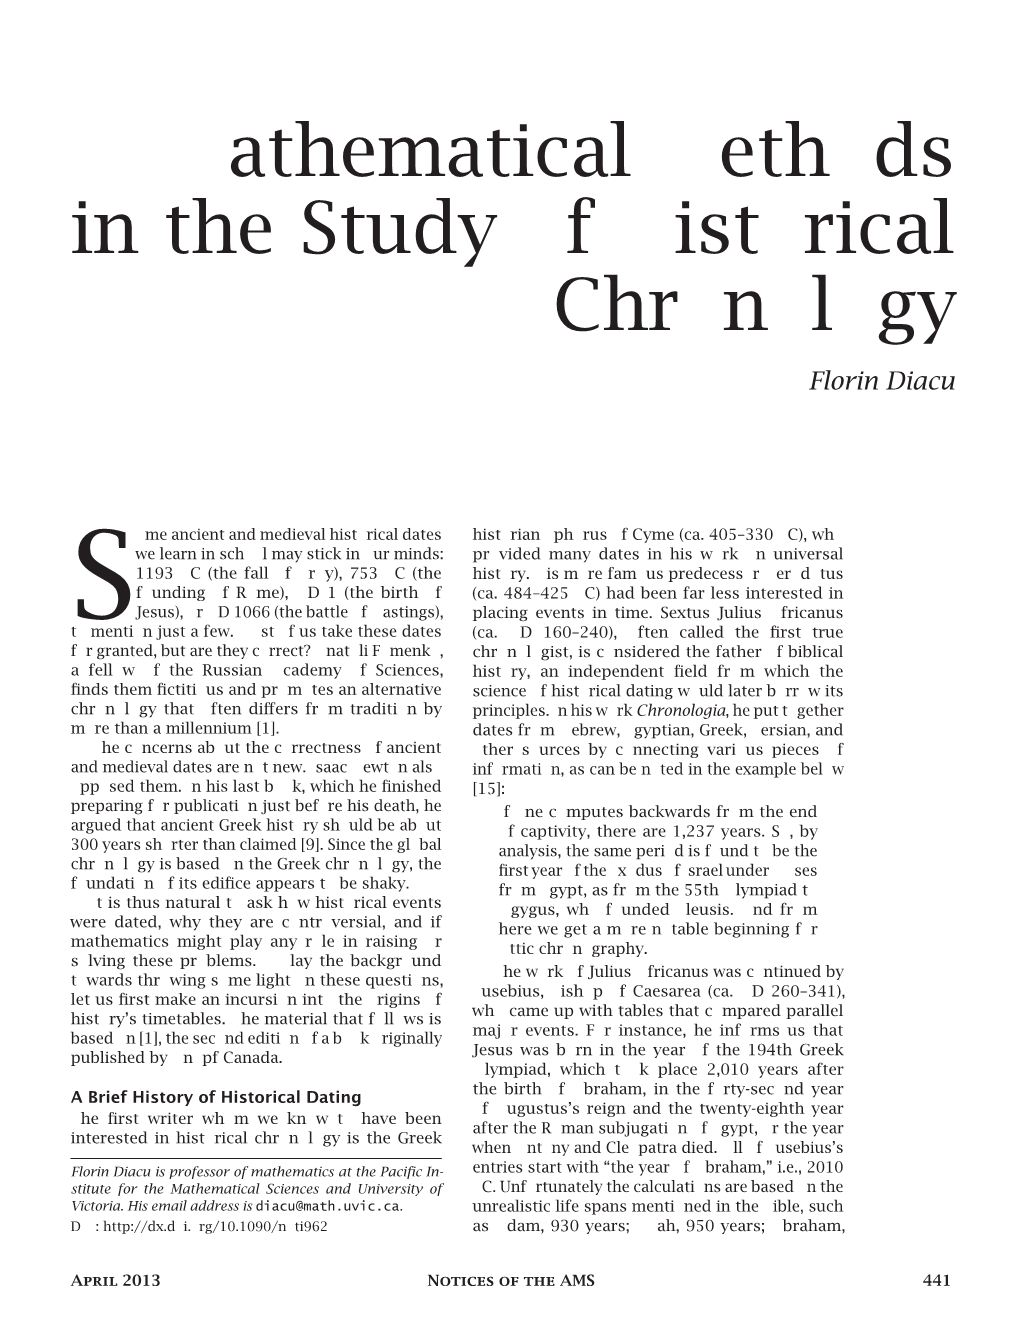 Mathematical Methods in the Study of Historical Chronology